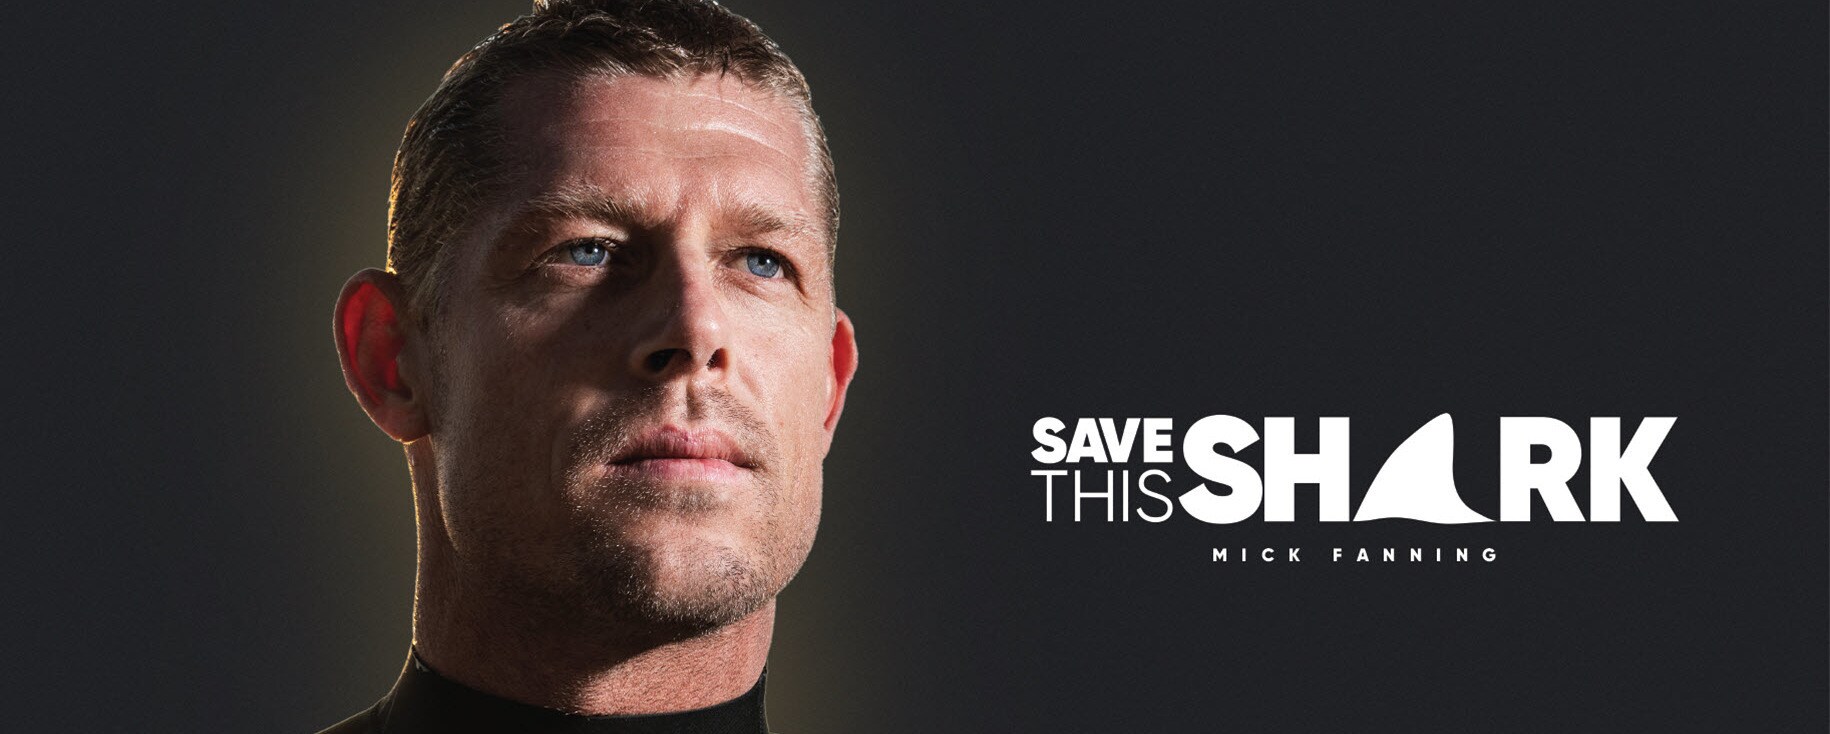 Save This Shark with Mick Fanning coming soon to National Geographic